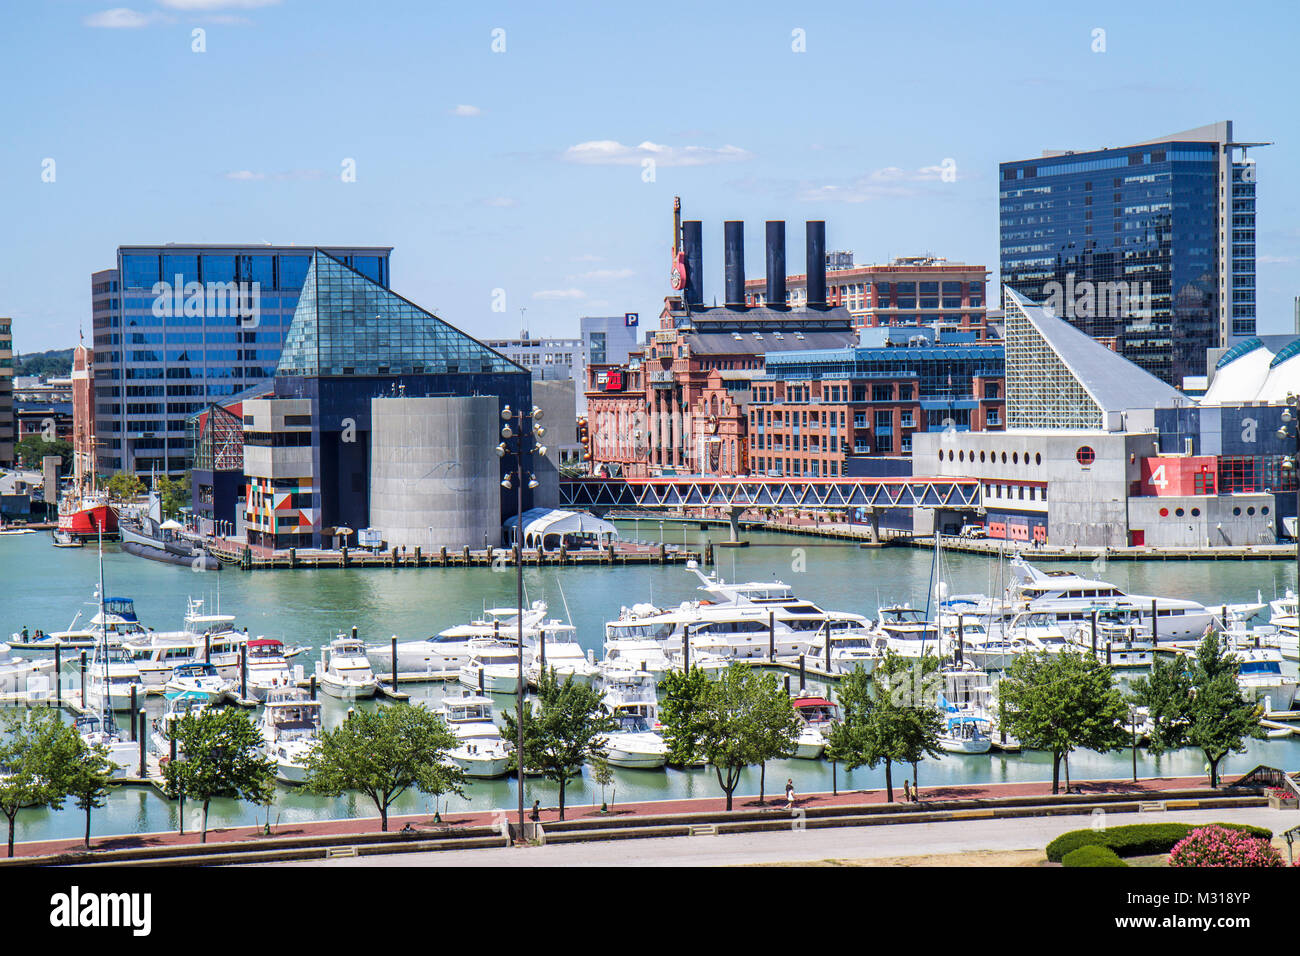 Baltimore Maryland,Federal Hill Park,Inner Harbor,harbour,Patapsco River,port,waterfront,skyline,aquarium,attraction,building,marina,boat,yacht,view,M Stock Photo